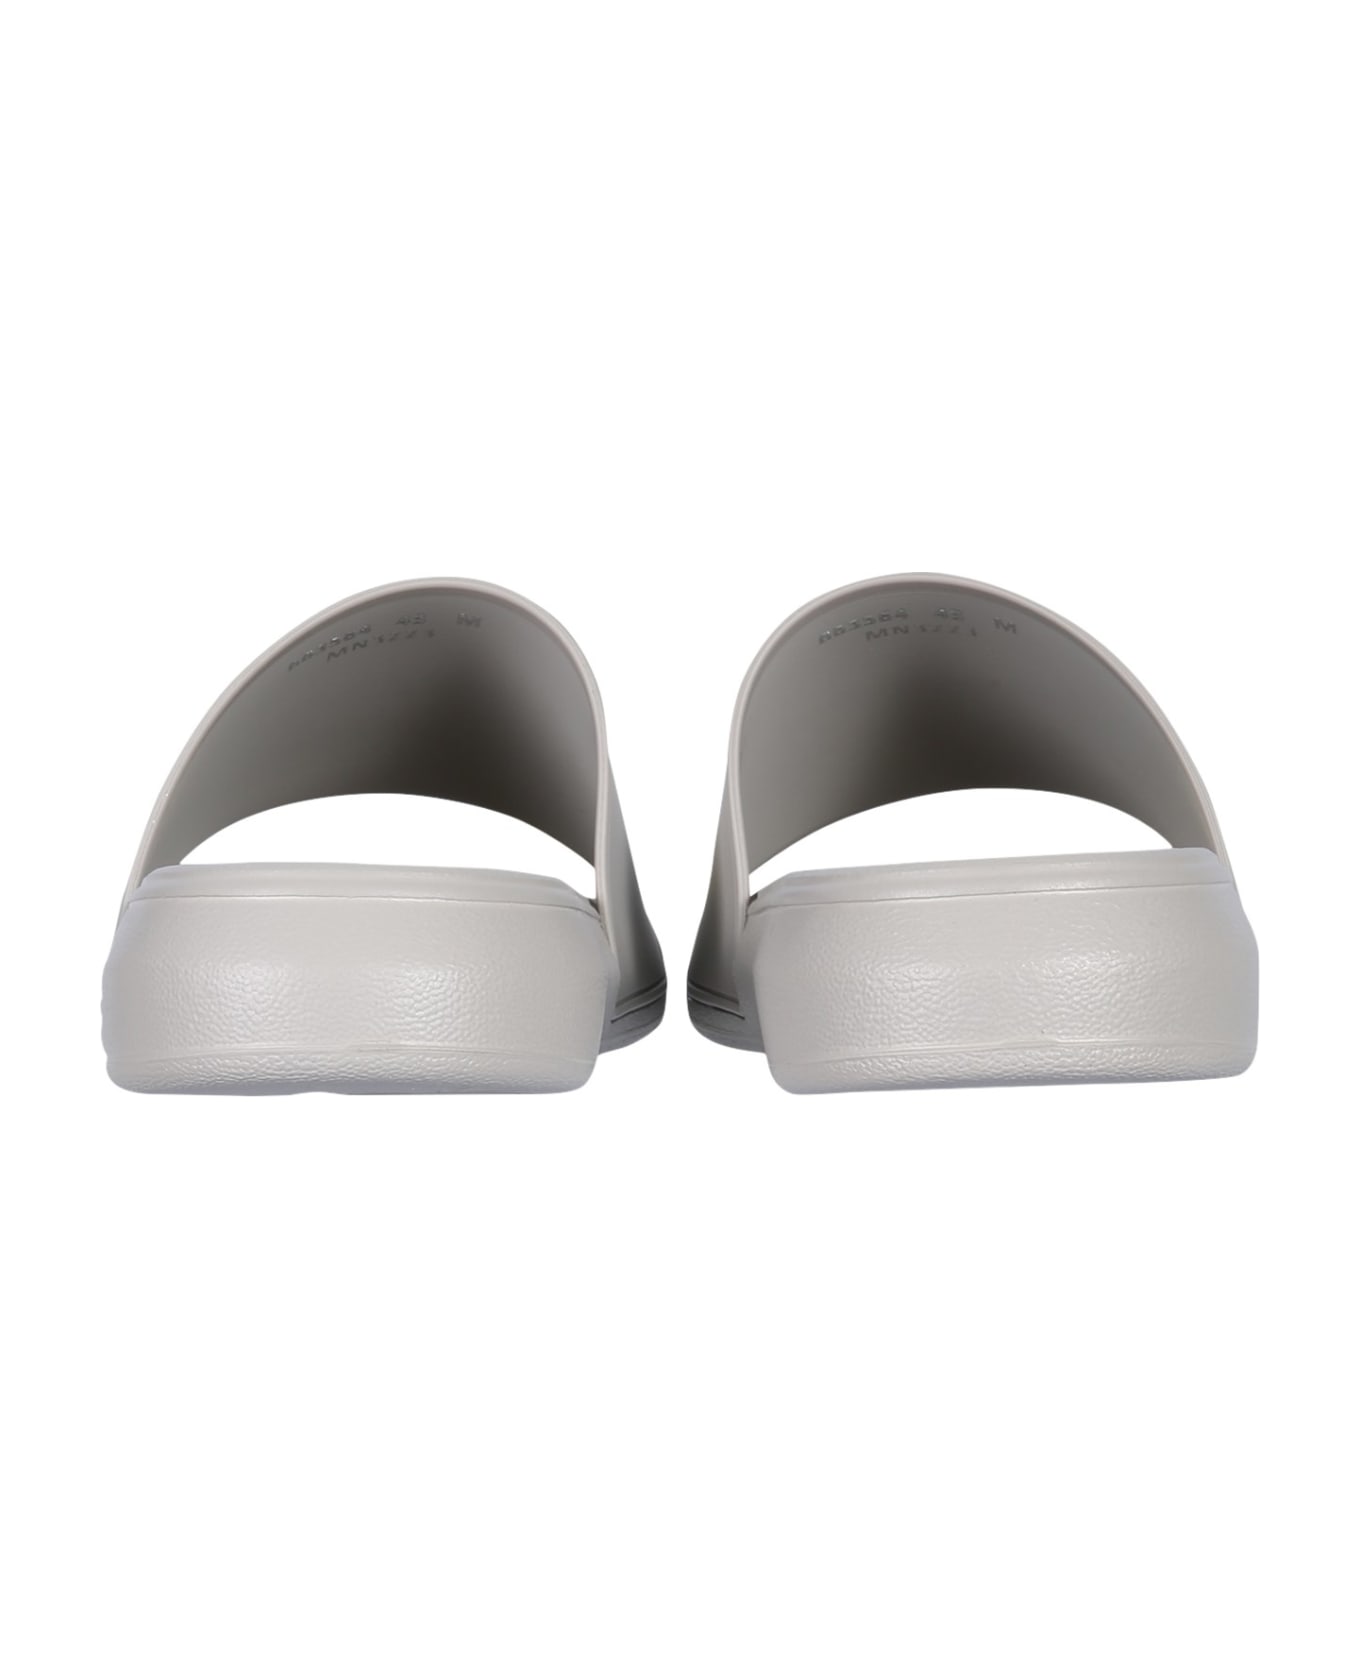 Alexander McQueen Rubber Pool Slides - Stone 221 その他各種シューズ